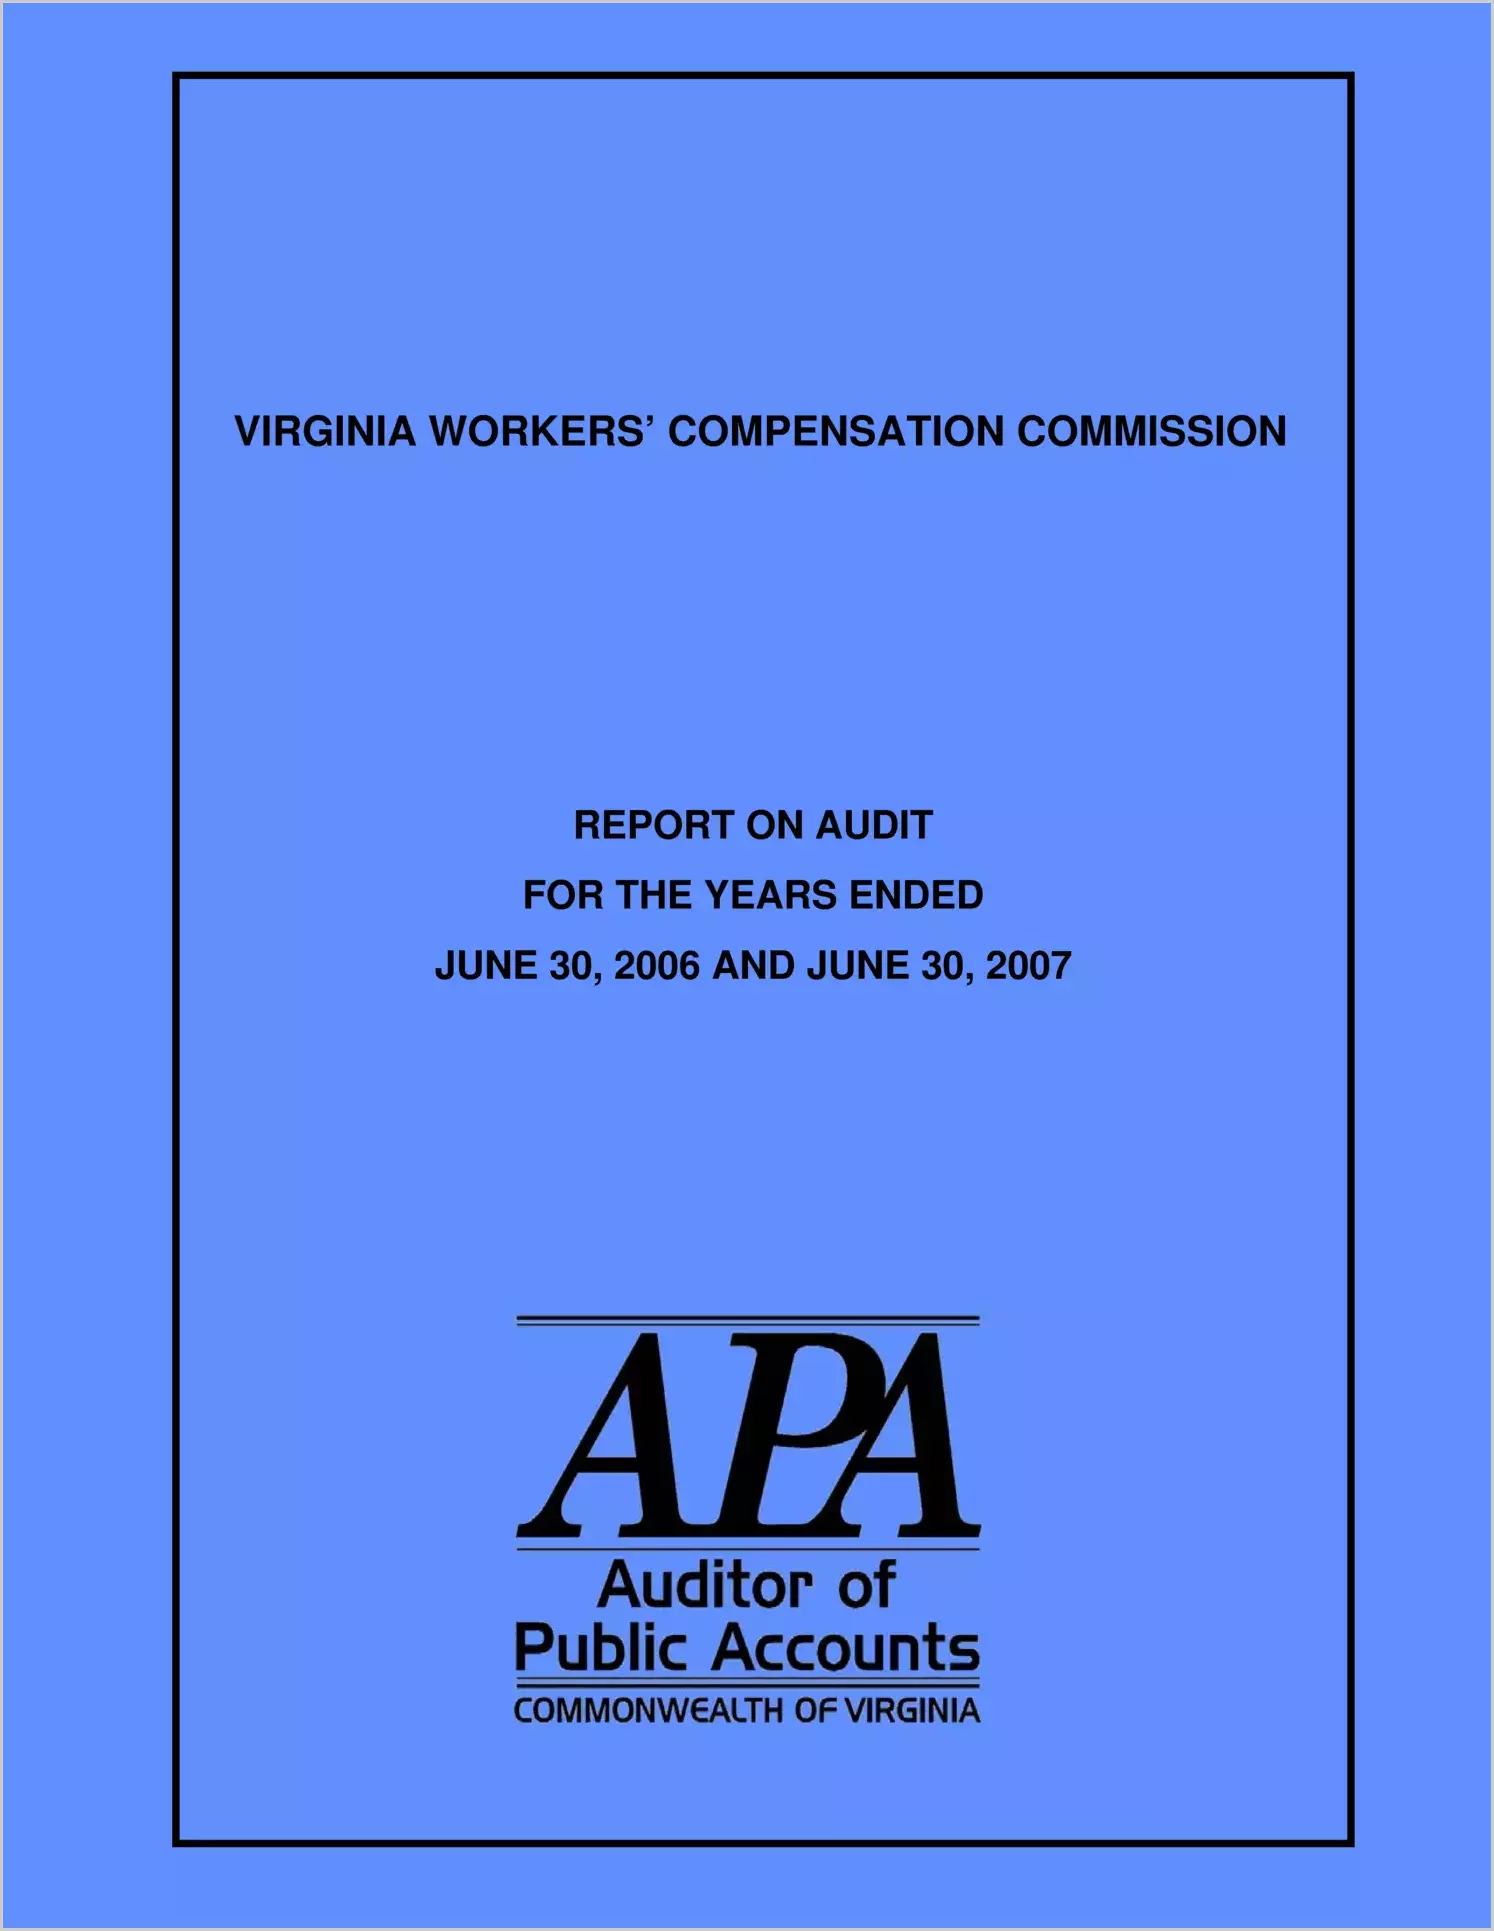 Virginia Worker's Compensation Commission report on audit for the years ended June 30, 2006 and June 30, 2007